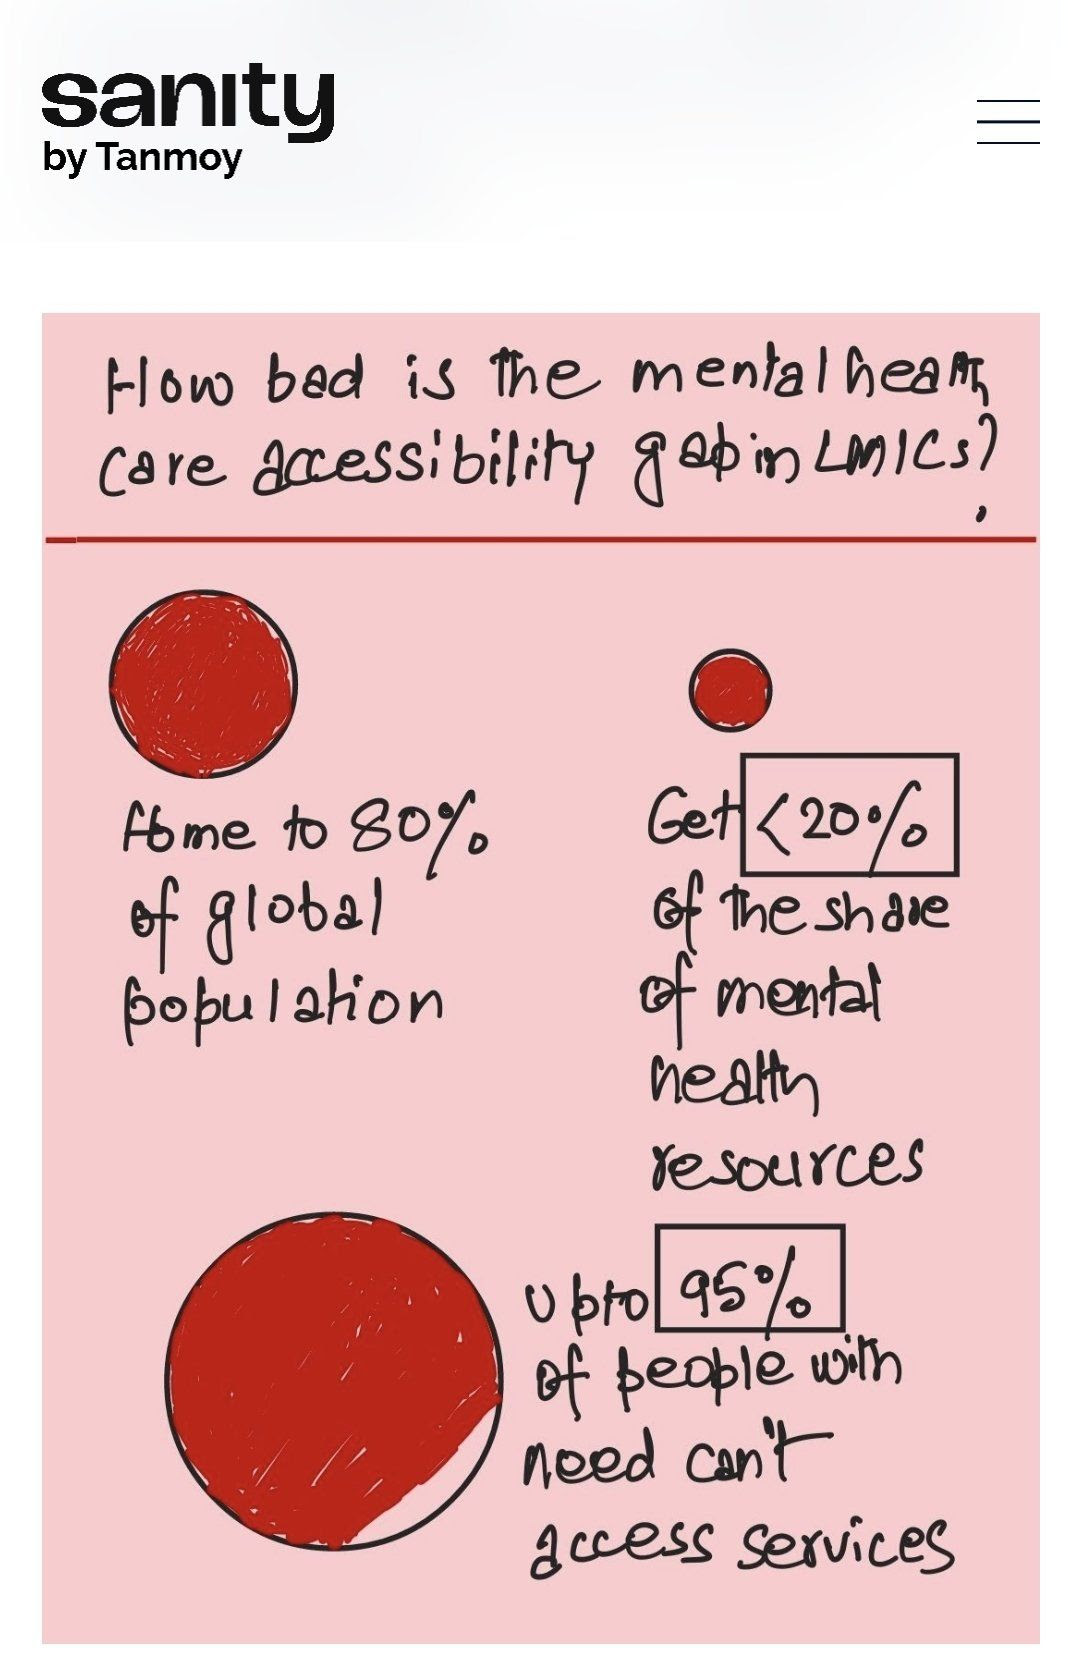 Low- and middle-income countries (LMICs) are home to 80% of the global population but get less than 20% of available mental health resources. Up to 95% of LMIC populations with need can't access any services at all.